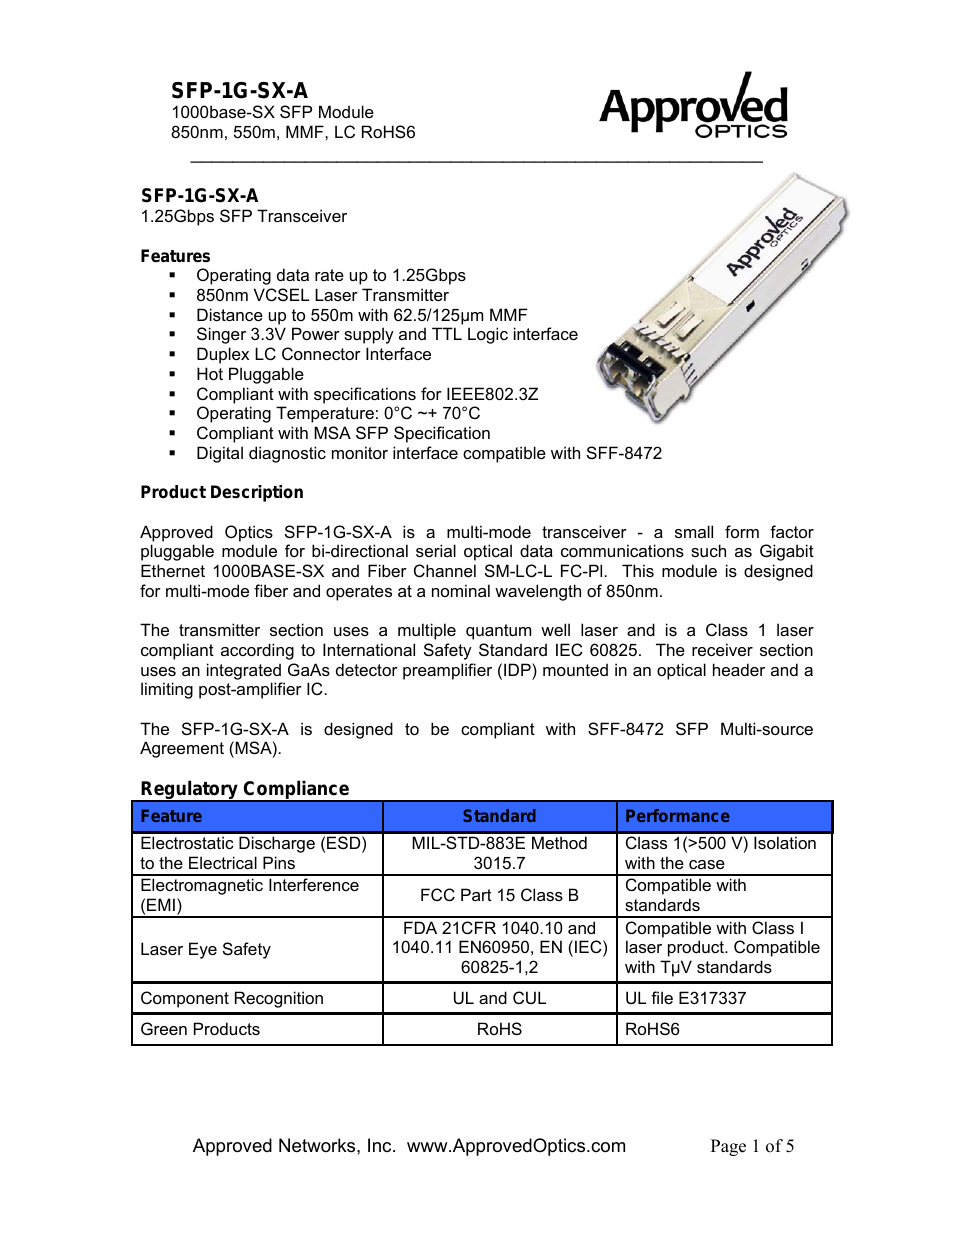 Approved ARISTA SFP-1G-SX